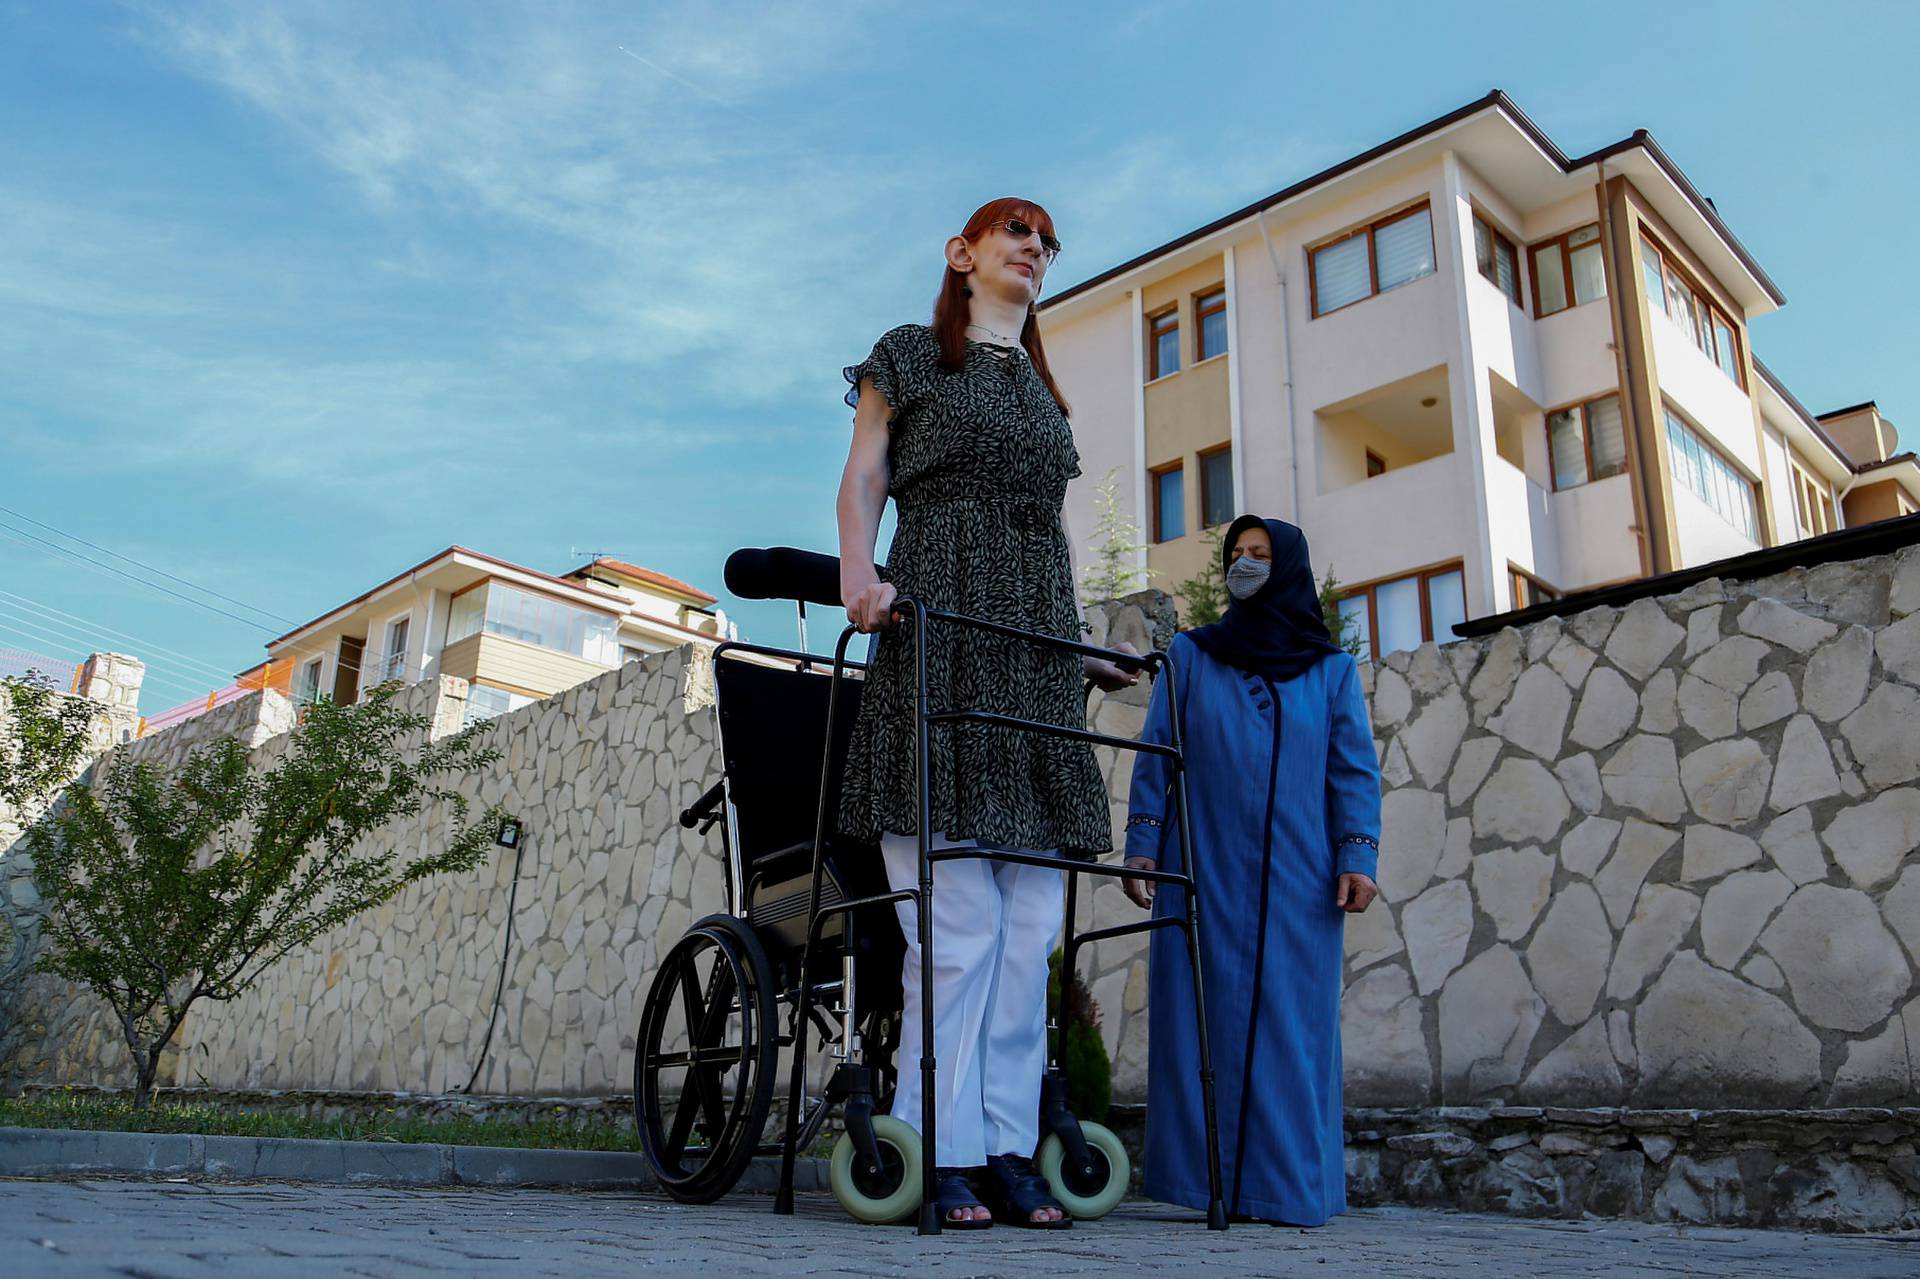 World's tallest woman Rumeysa Gelgi holds a news conference in Karabuk